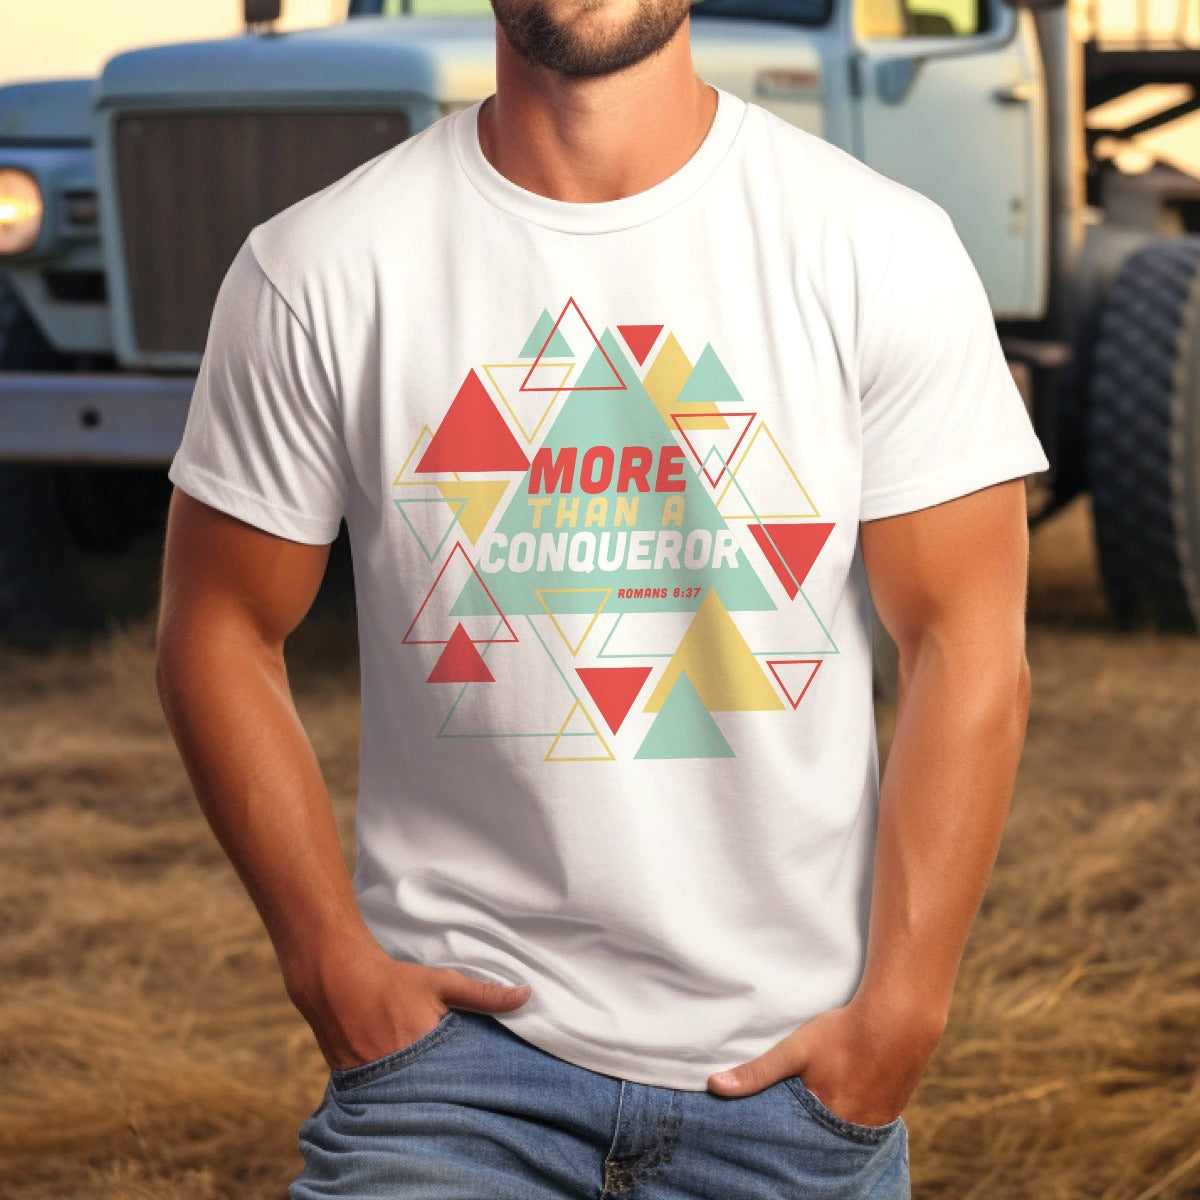 Strong man wearing a white "More Than A Conqueror" Romans 8:37 bible verse scripture unisex faith-based Christian Bella Canvas 3001 t-shirt, with bright and colorful geometric triangles pattern, made in the USA for Men and Women Jesus believers